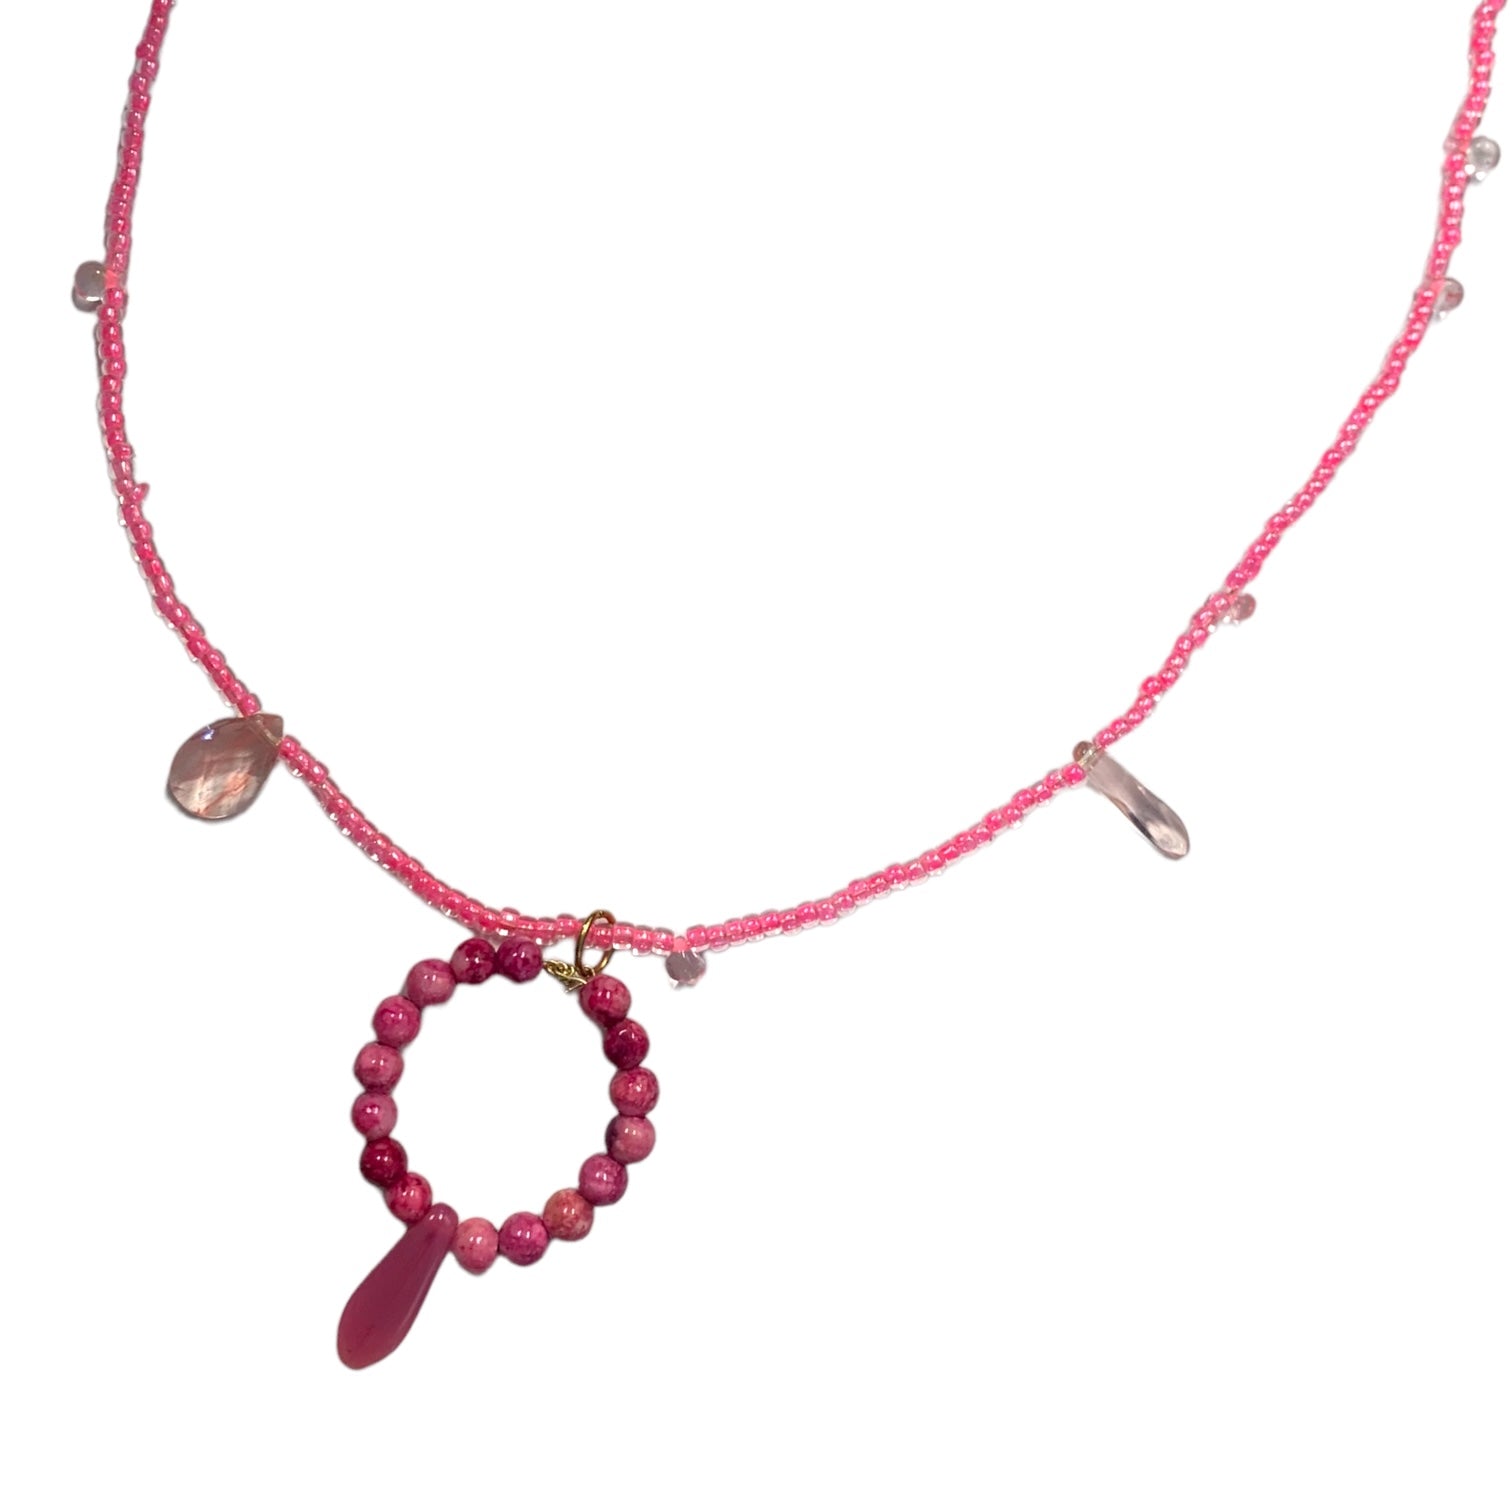 1 of 1 Hand-Beaded Czech Crystal Pink and Gold Necklace-